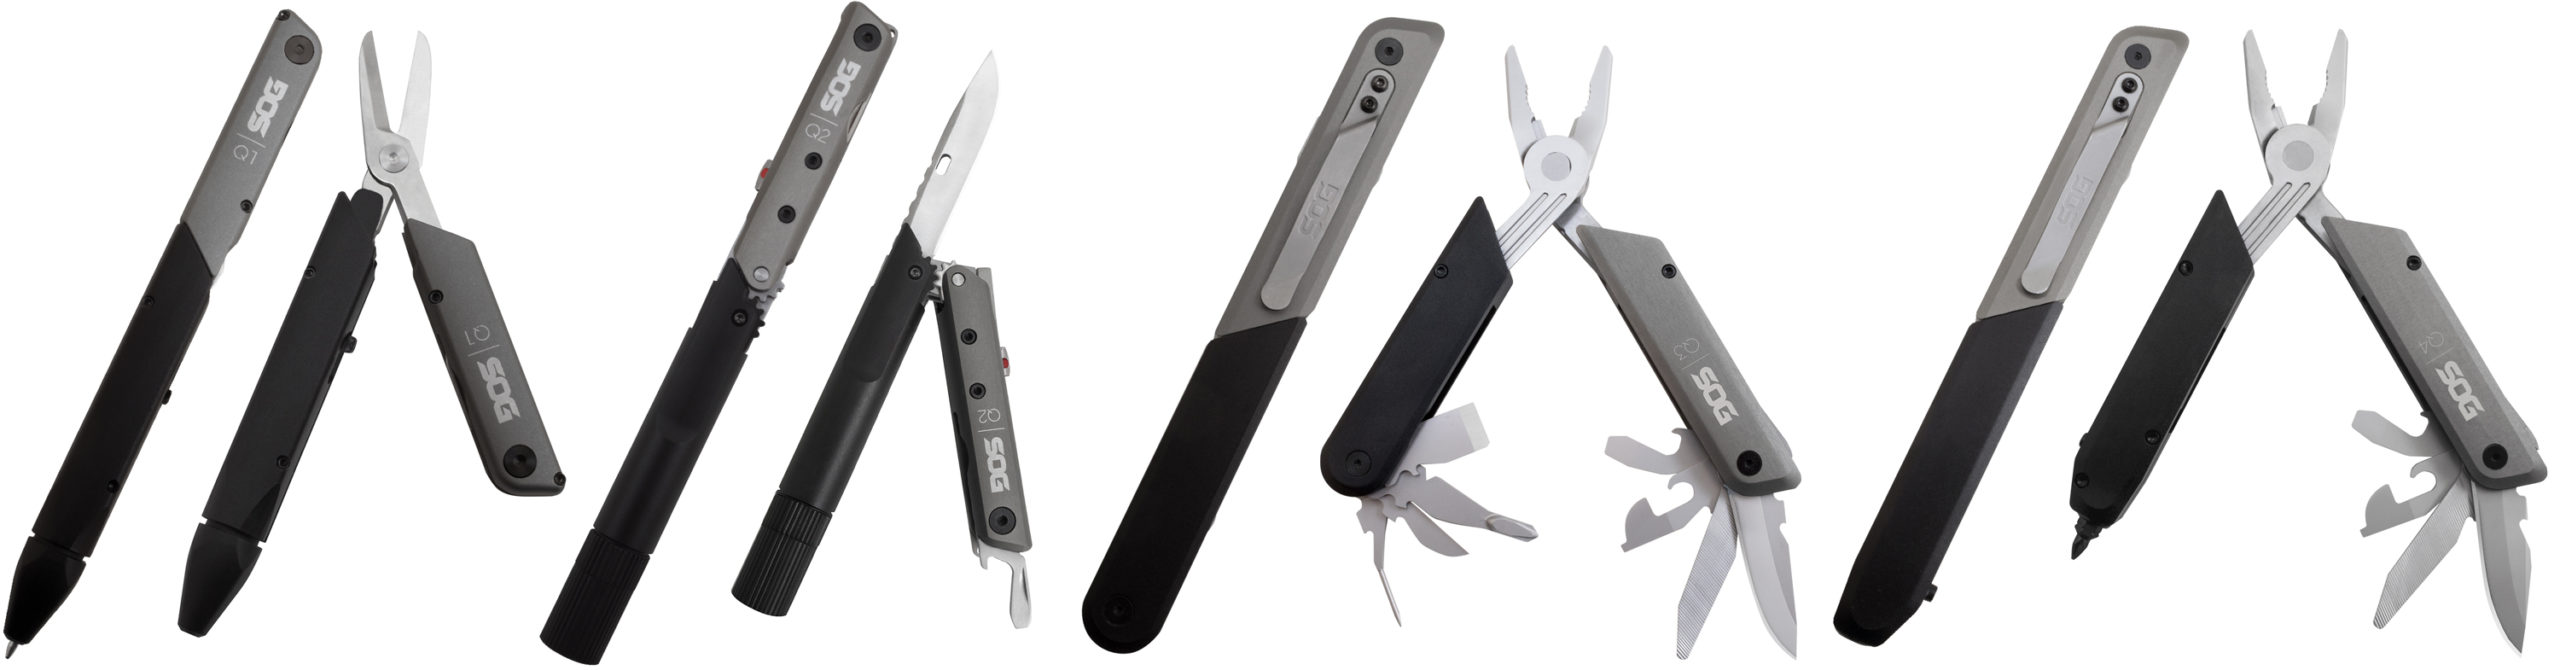 SOG’s New Multitool Pens Are Mightier Than Swords